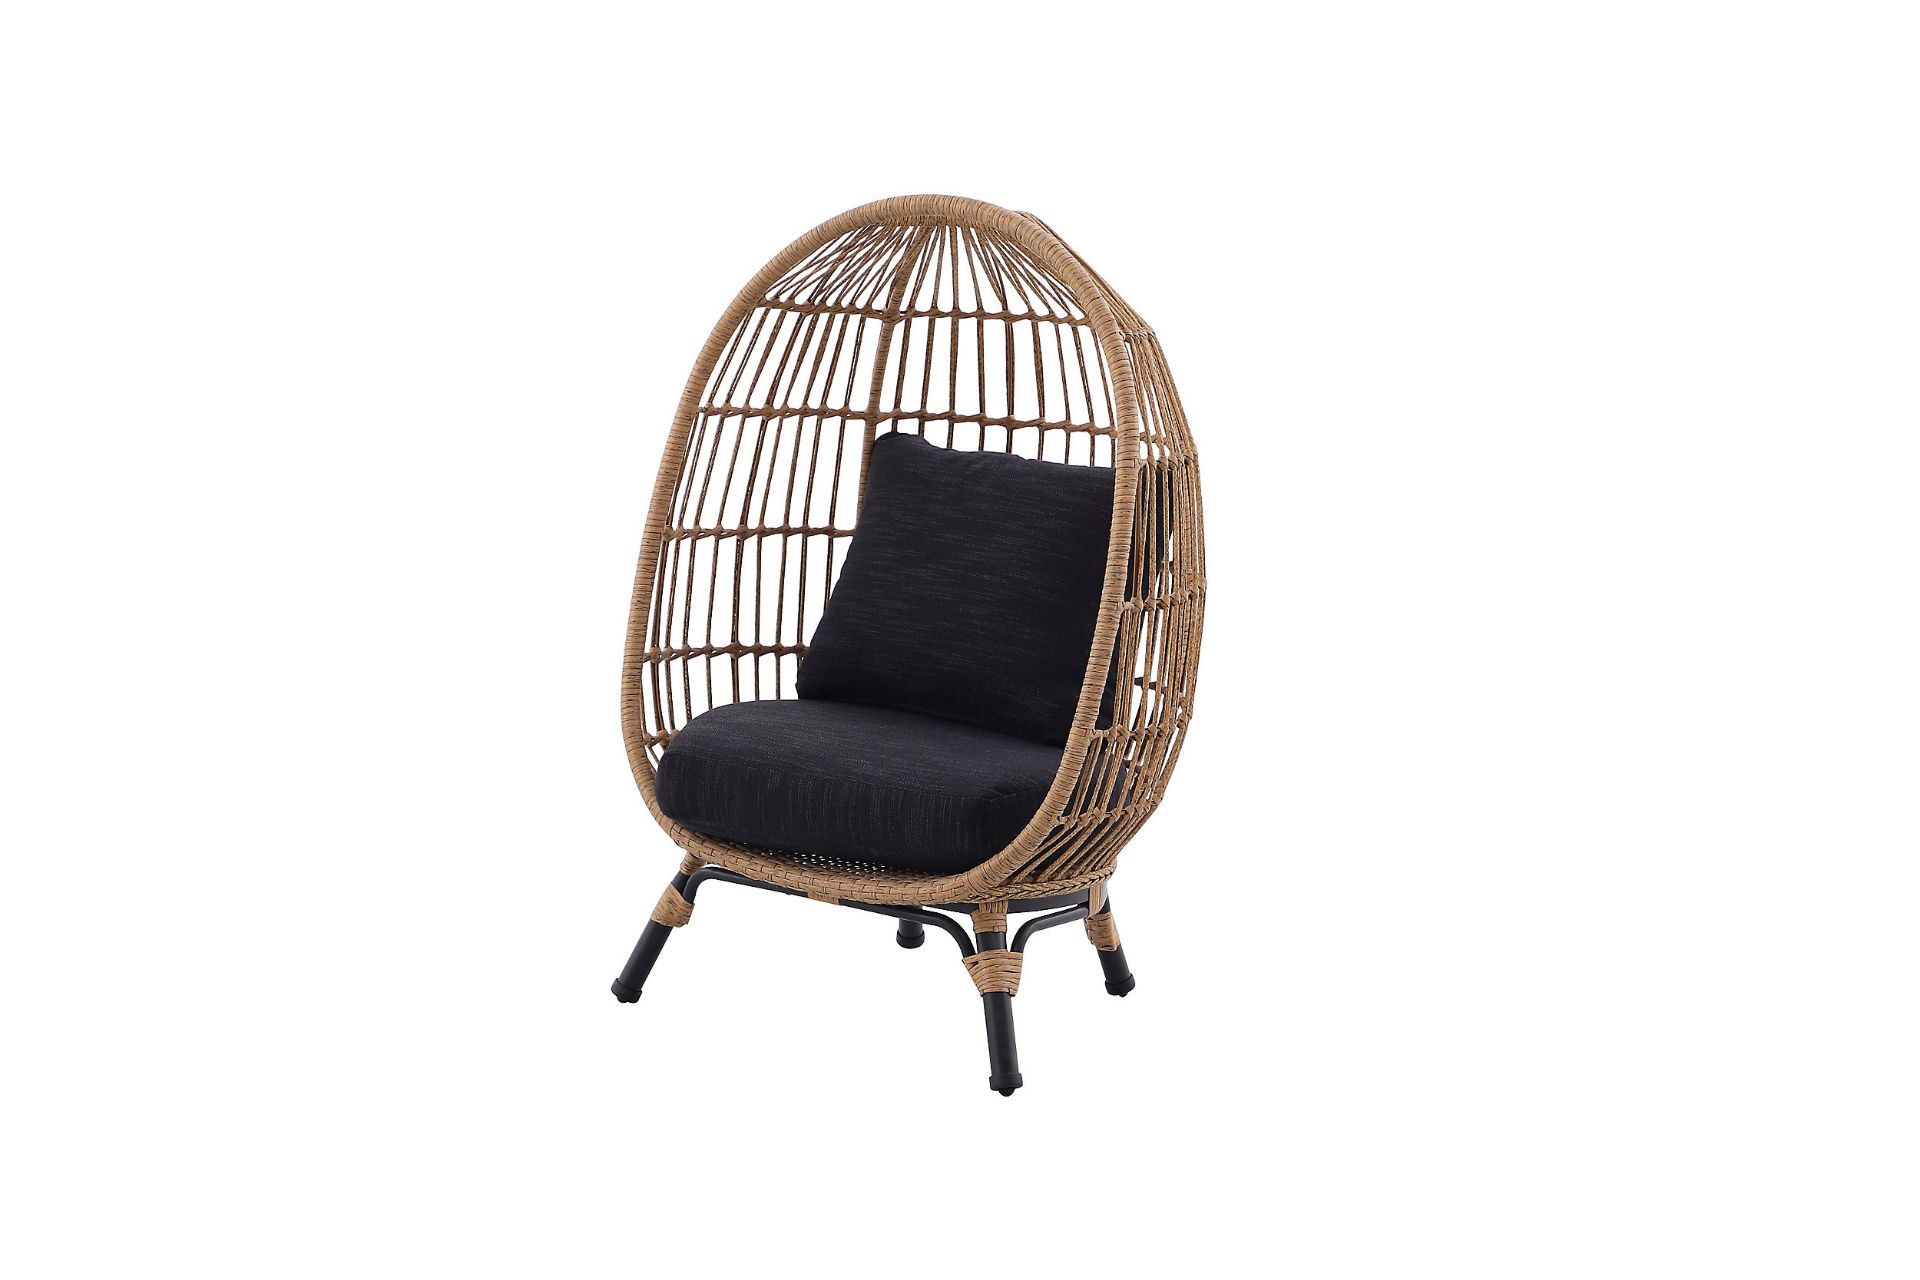 BRAND NEW APOLINA CHILDRENS WICKER WEAVE EGG CHAIR S1R2